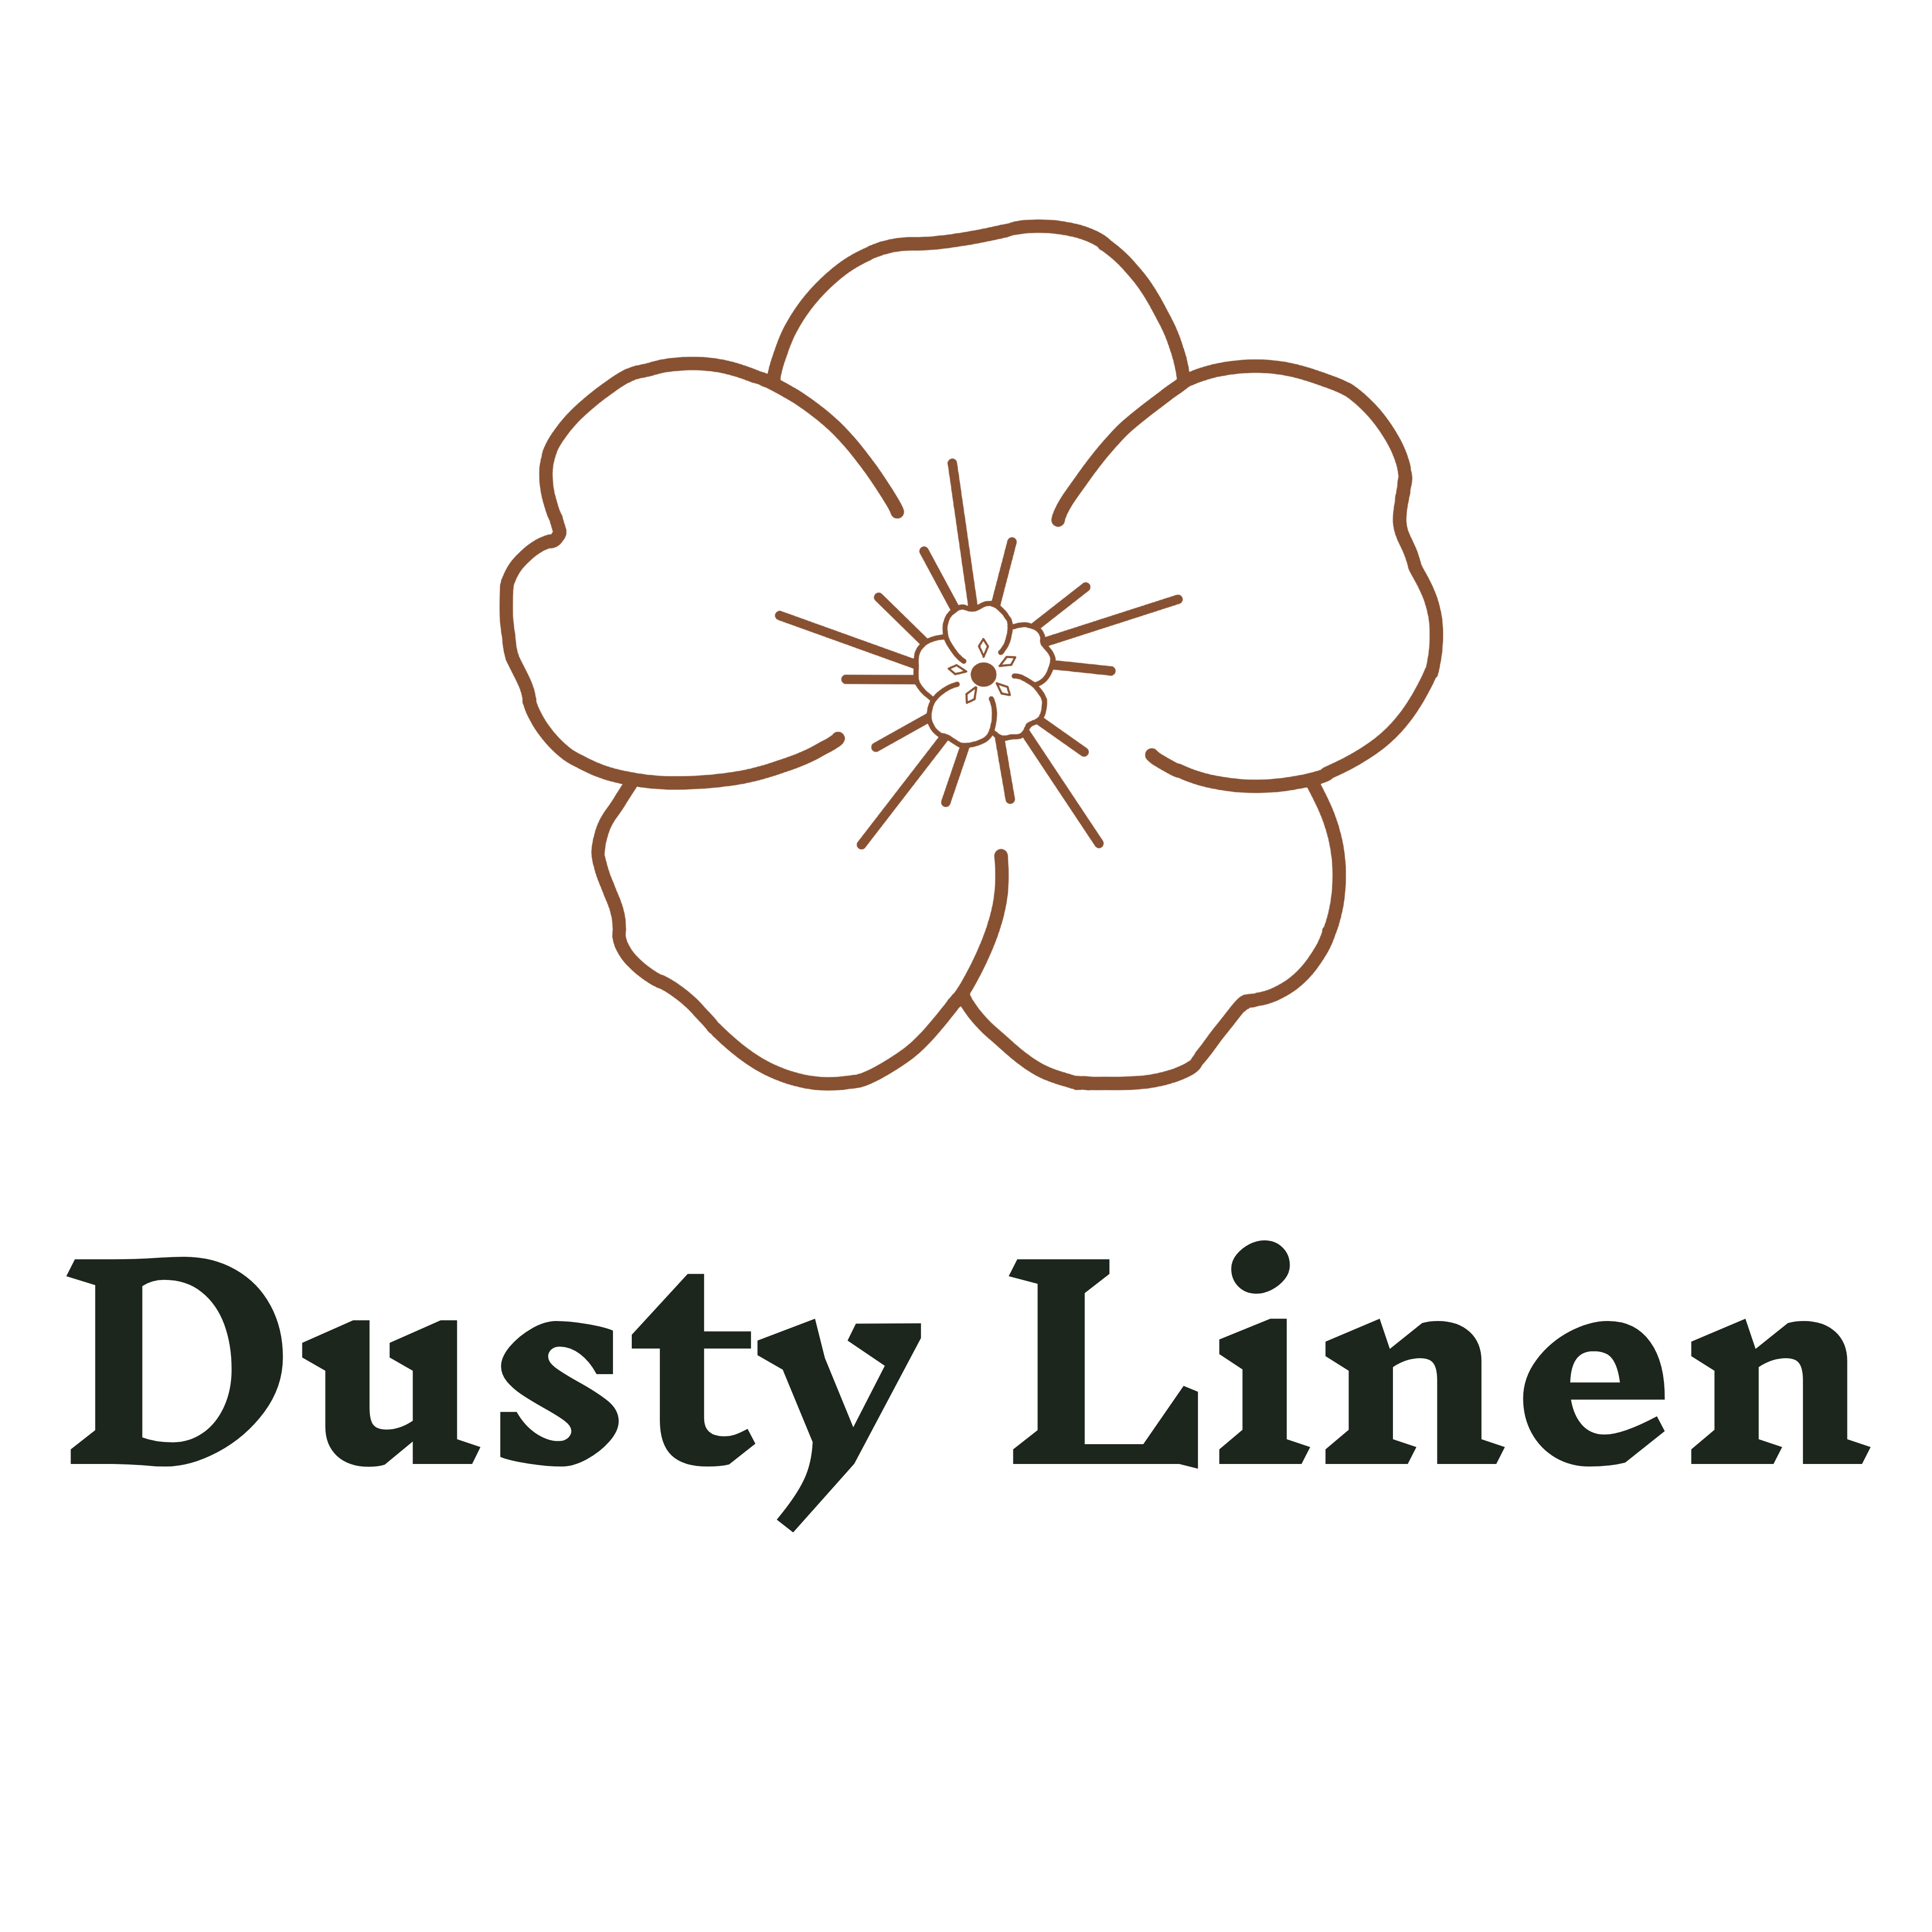 DustyLinen: The Brand that Provides Unmatched Quality Products.